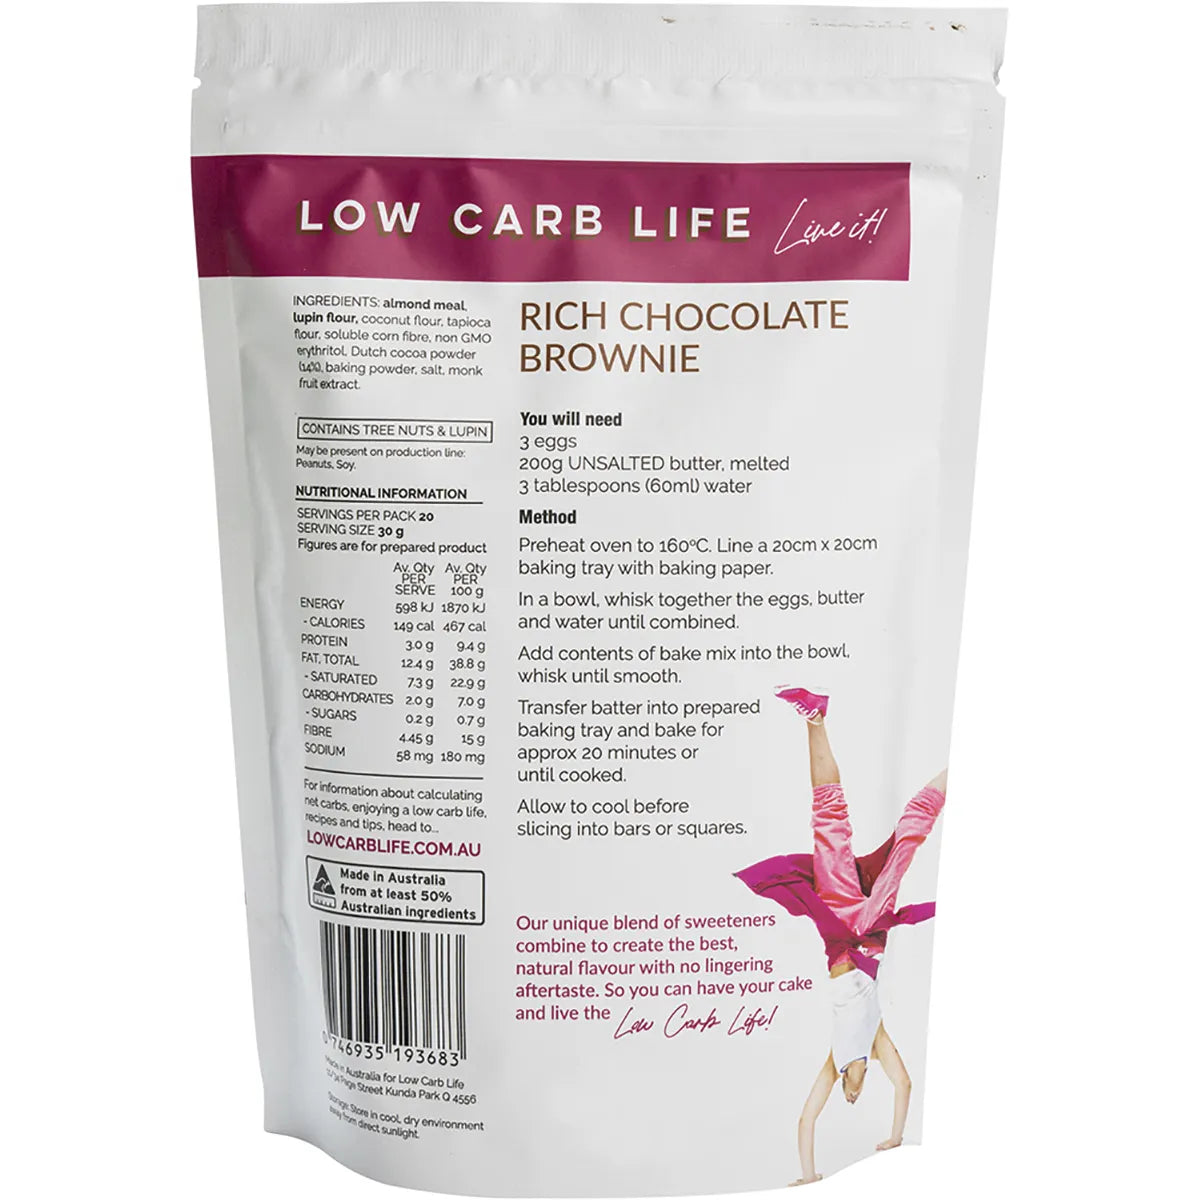 Low Carb Life Rich Chocolate Brownies Keto Bake Mix 300g